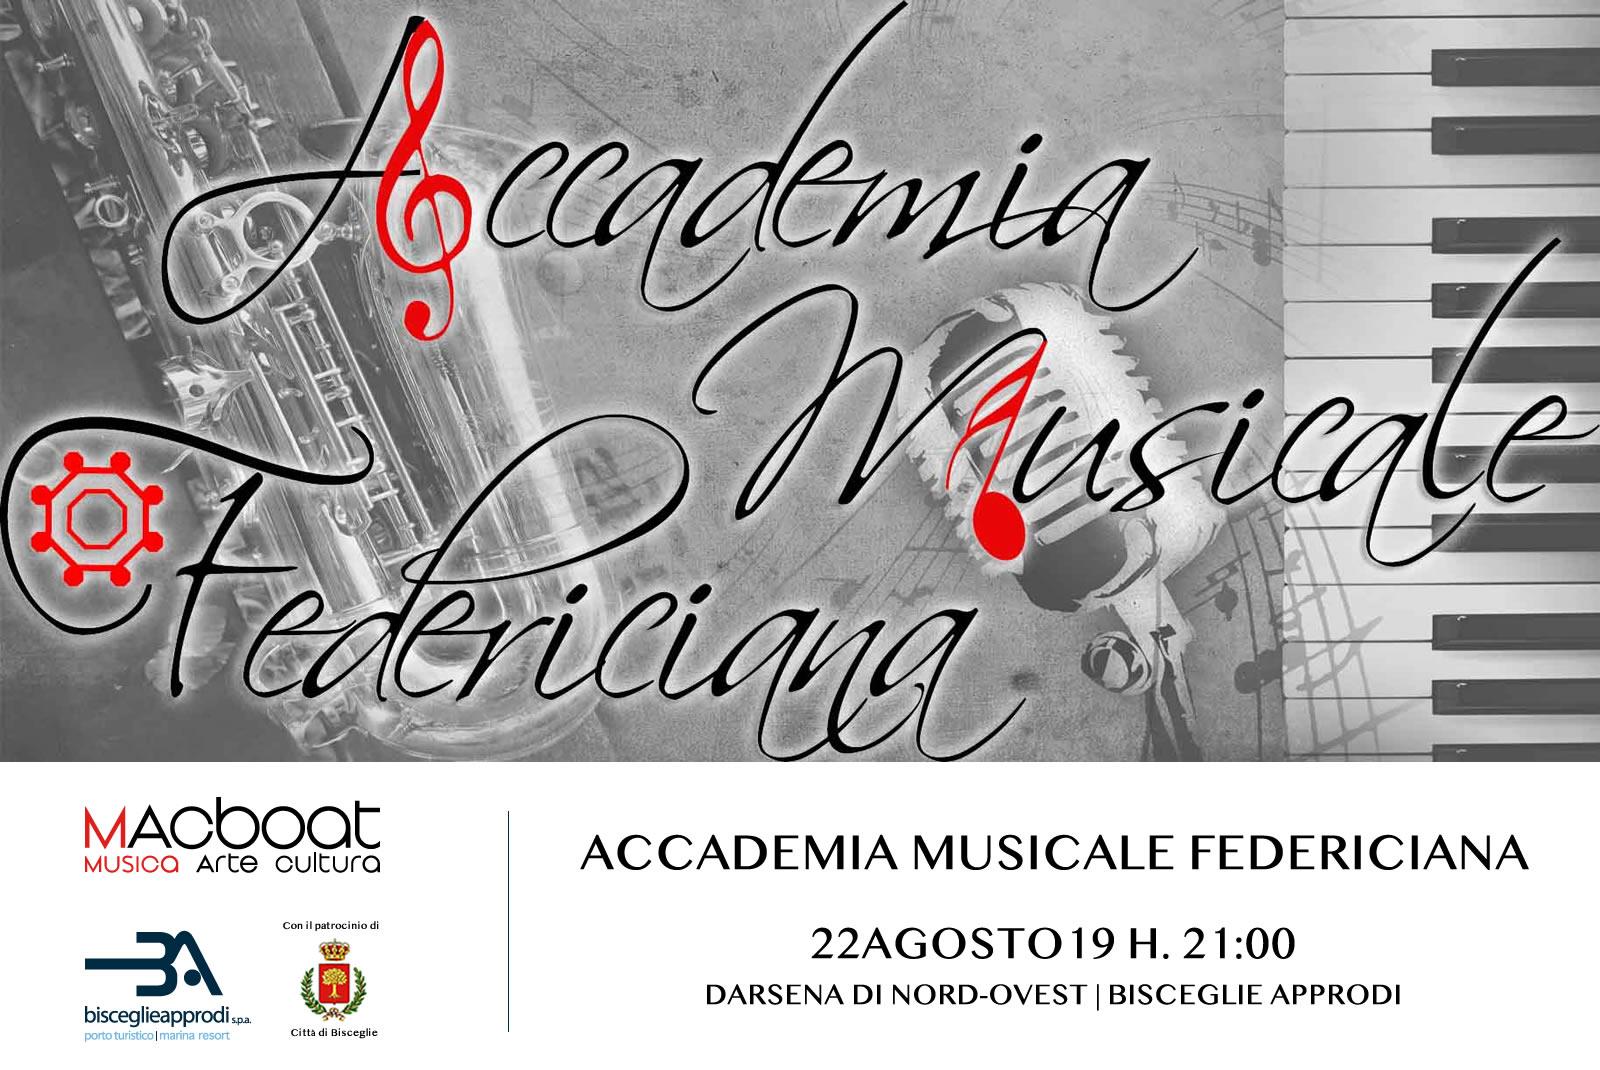 Accademia musicale